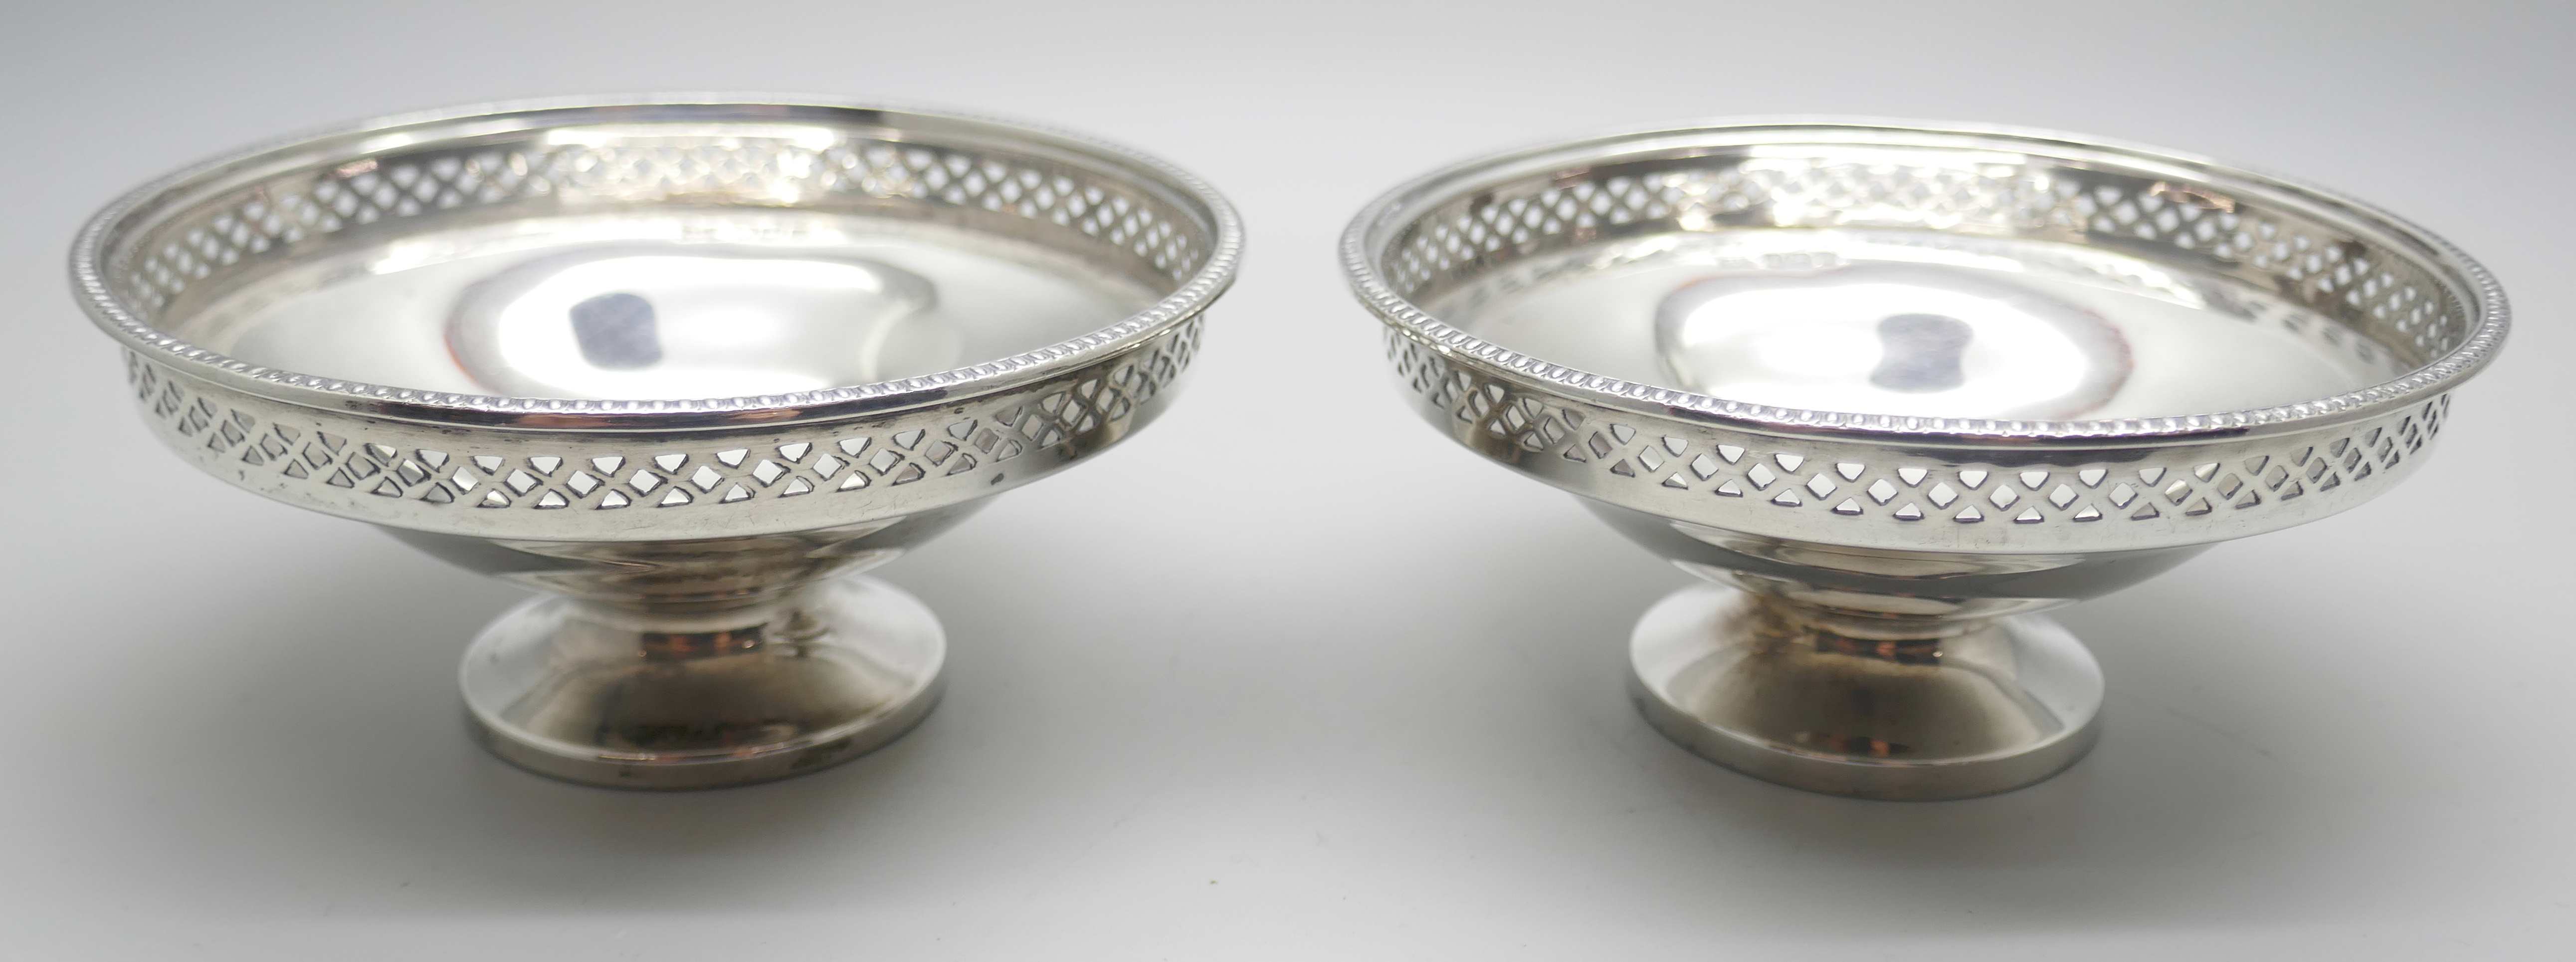 A pair of small pierced silver comports. Sheffield 1926, 113g, diameter 9.5cm